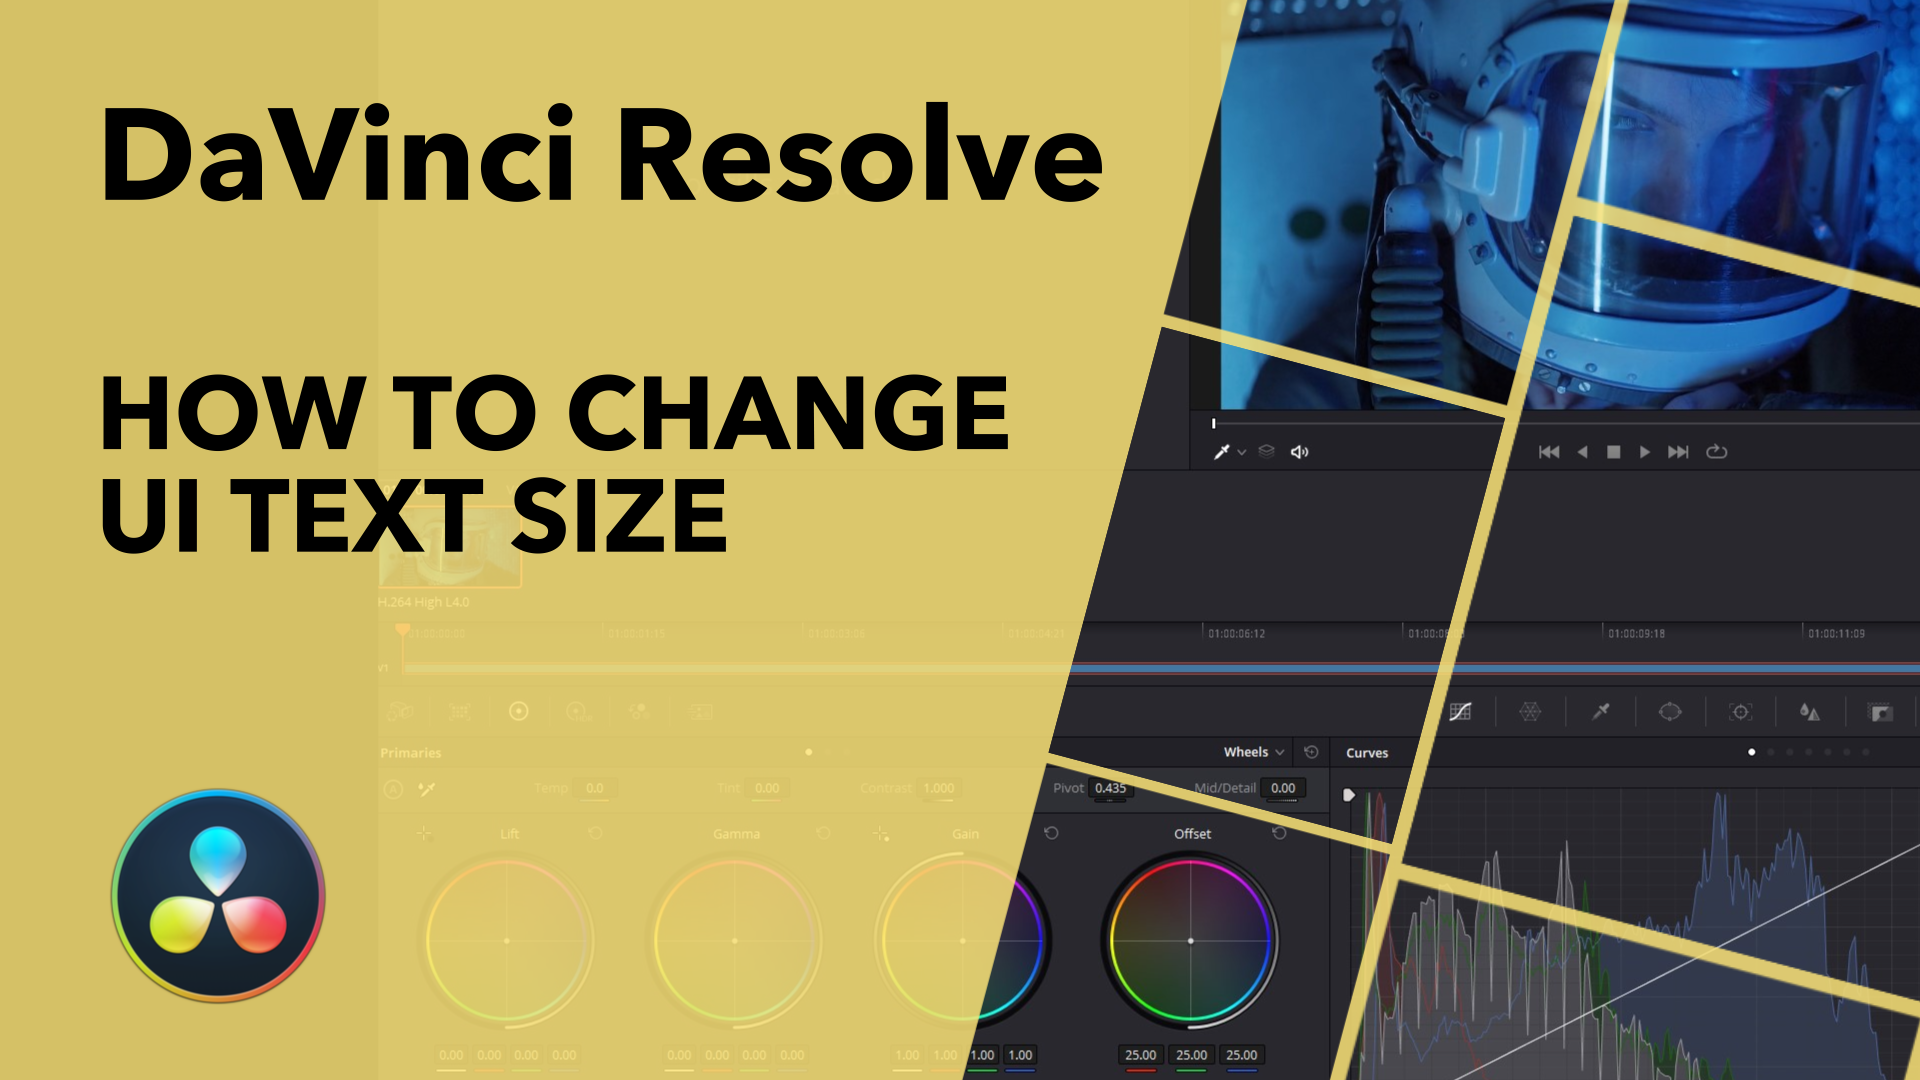 How to Scale UI Text for DaVinci Resolve